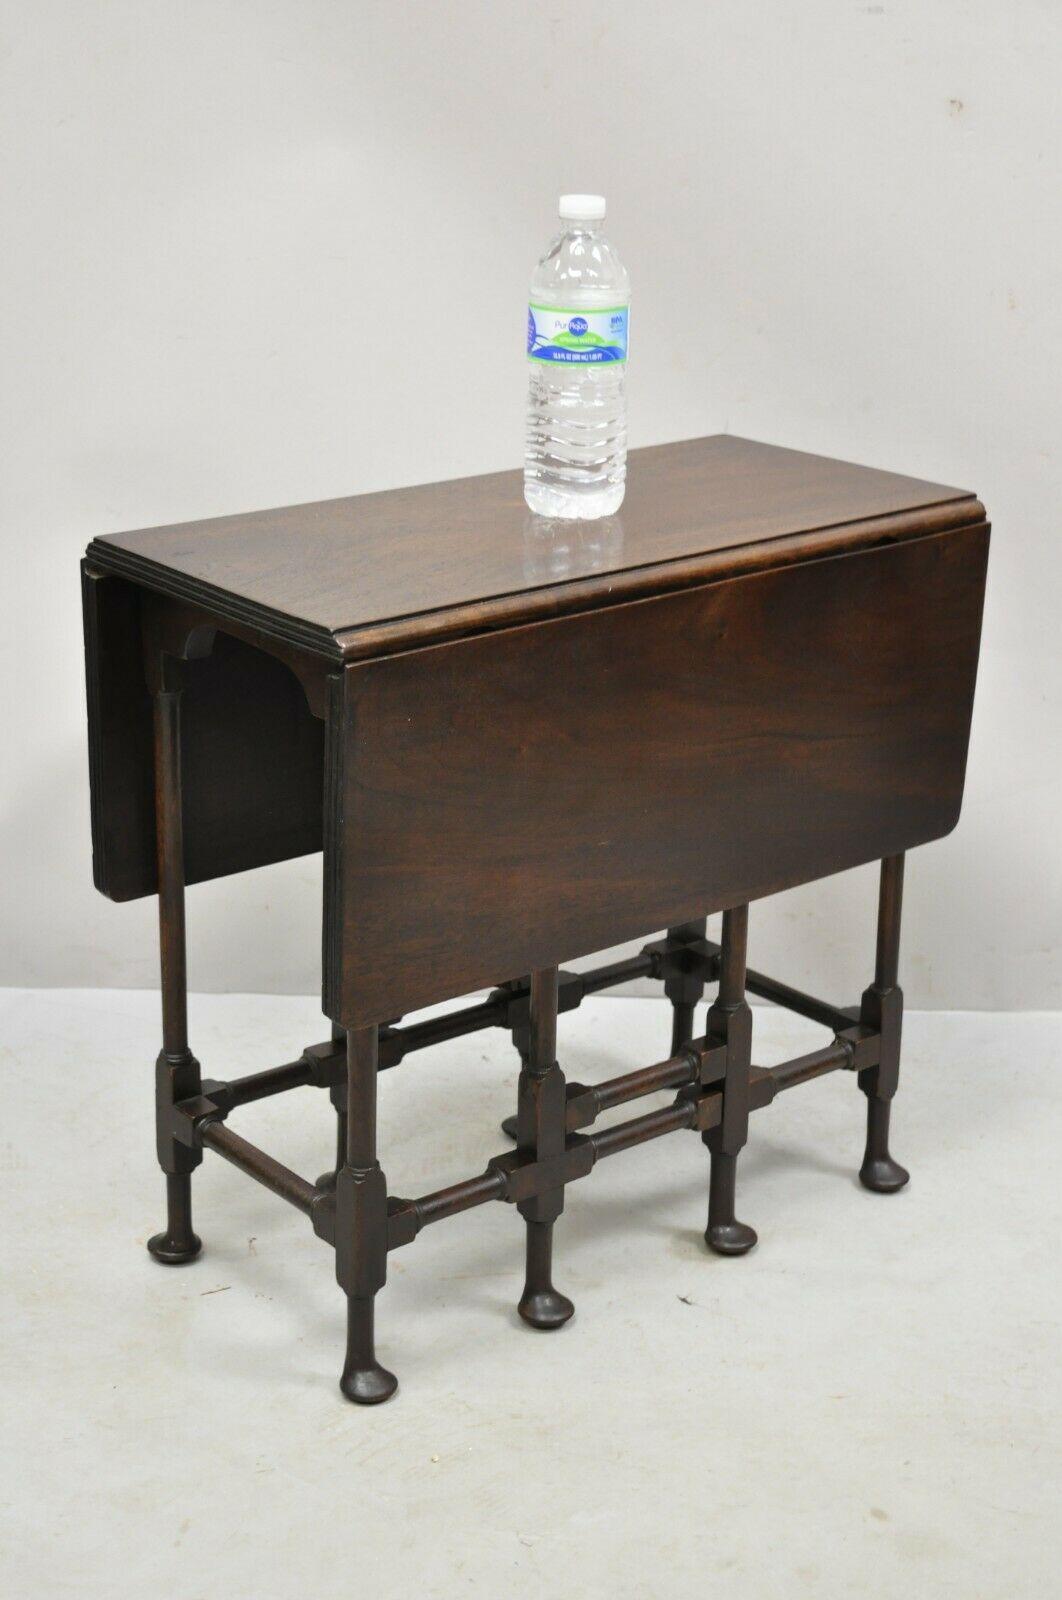 Antique small salesman sample mahogany drop leaf gate leg queen anne table. Item features unique small size, solid mahogany construction, gate legs, drop leaves, beautiful wood grain, very nice antique item. Circa Early to Mid 1900s.
Measurements: